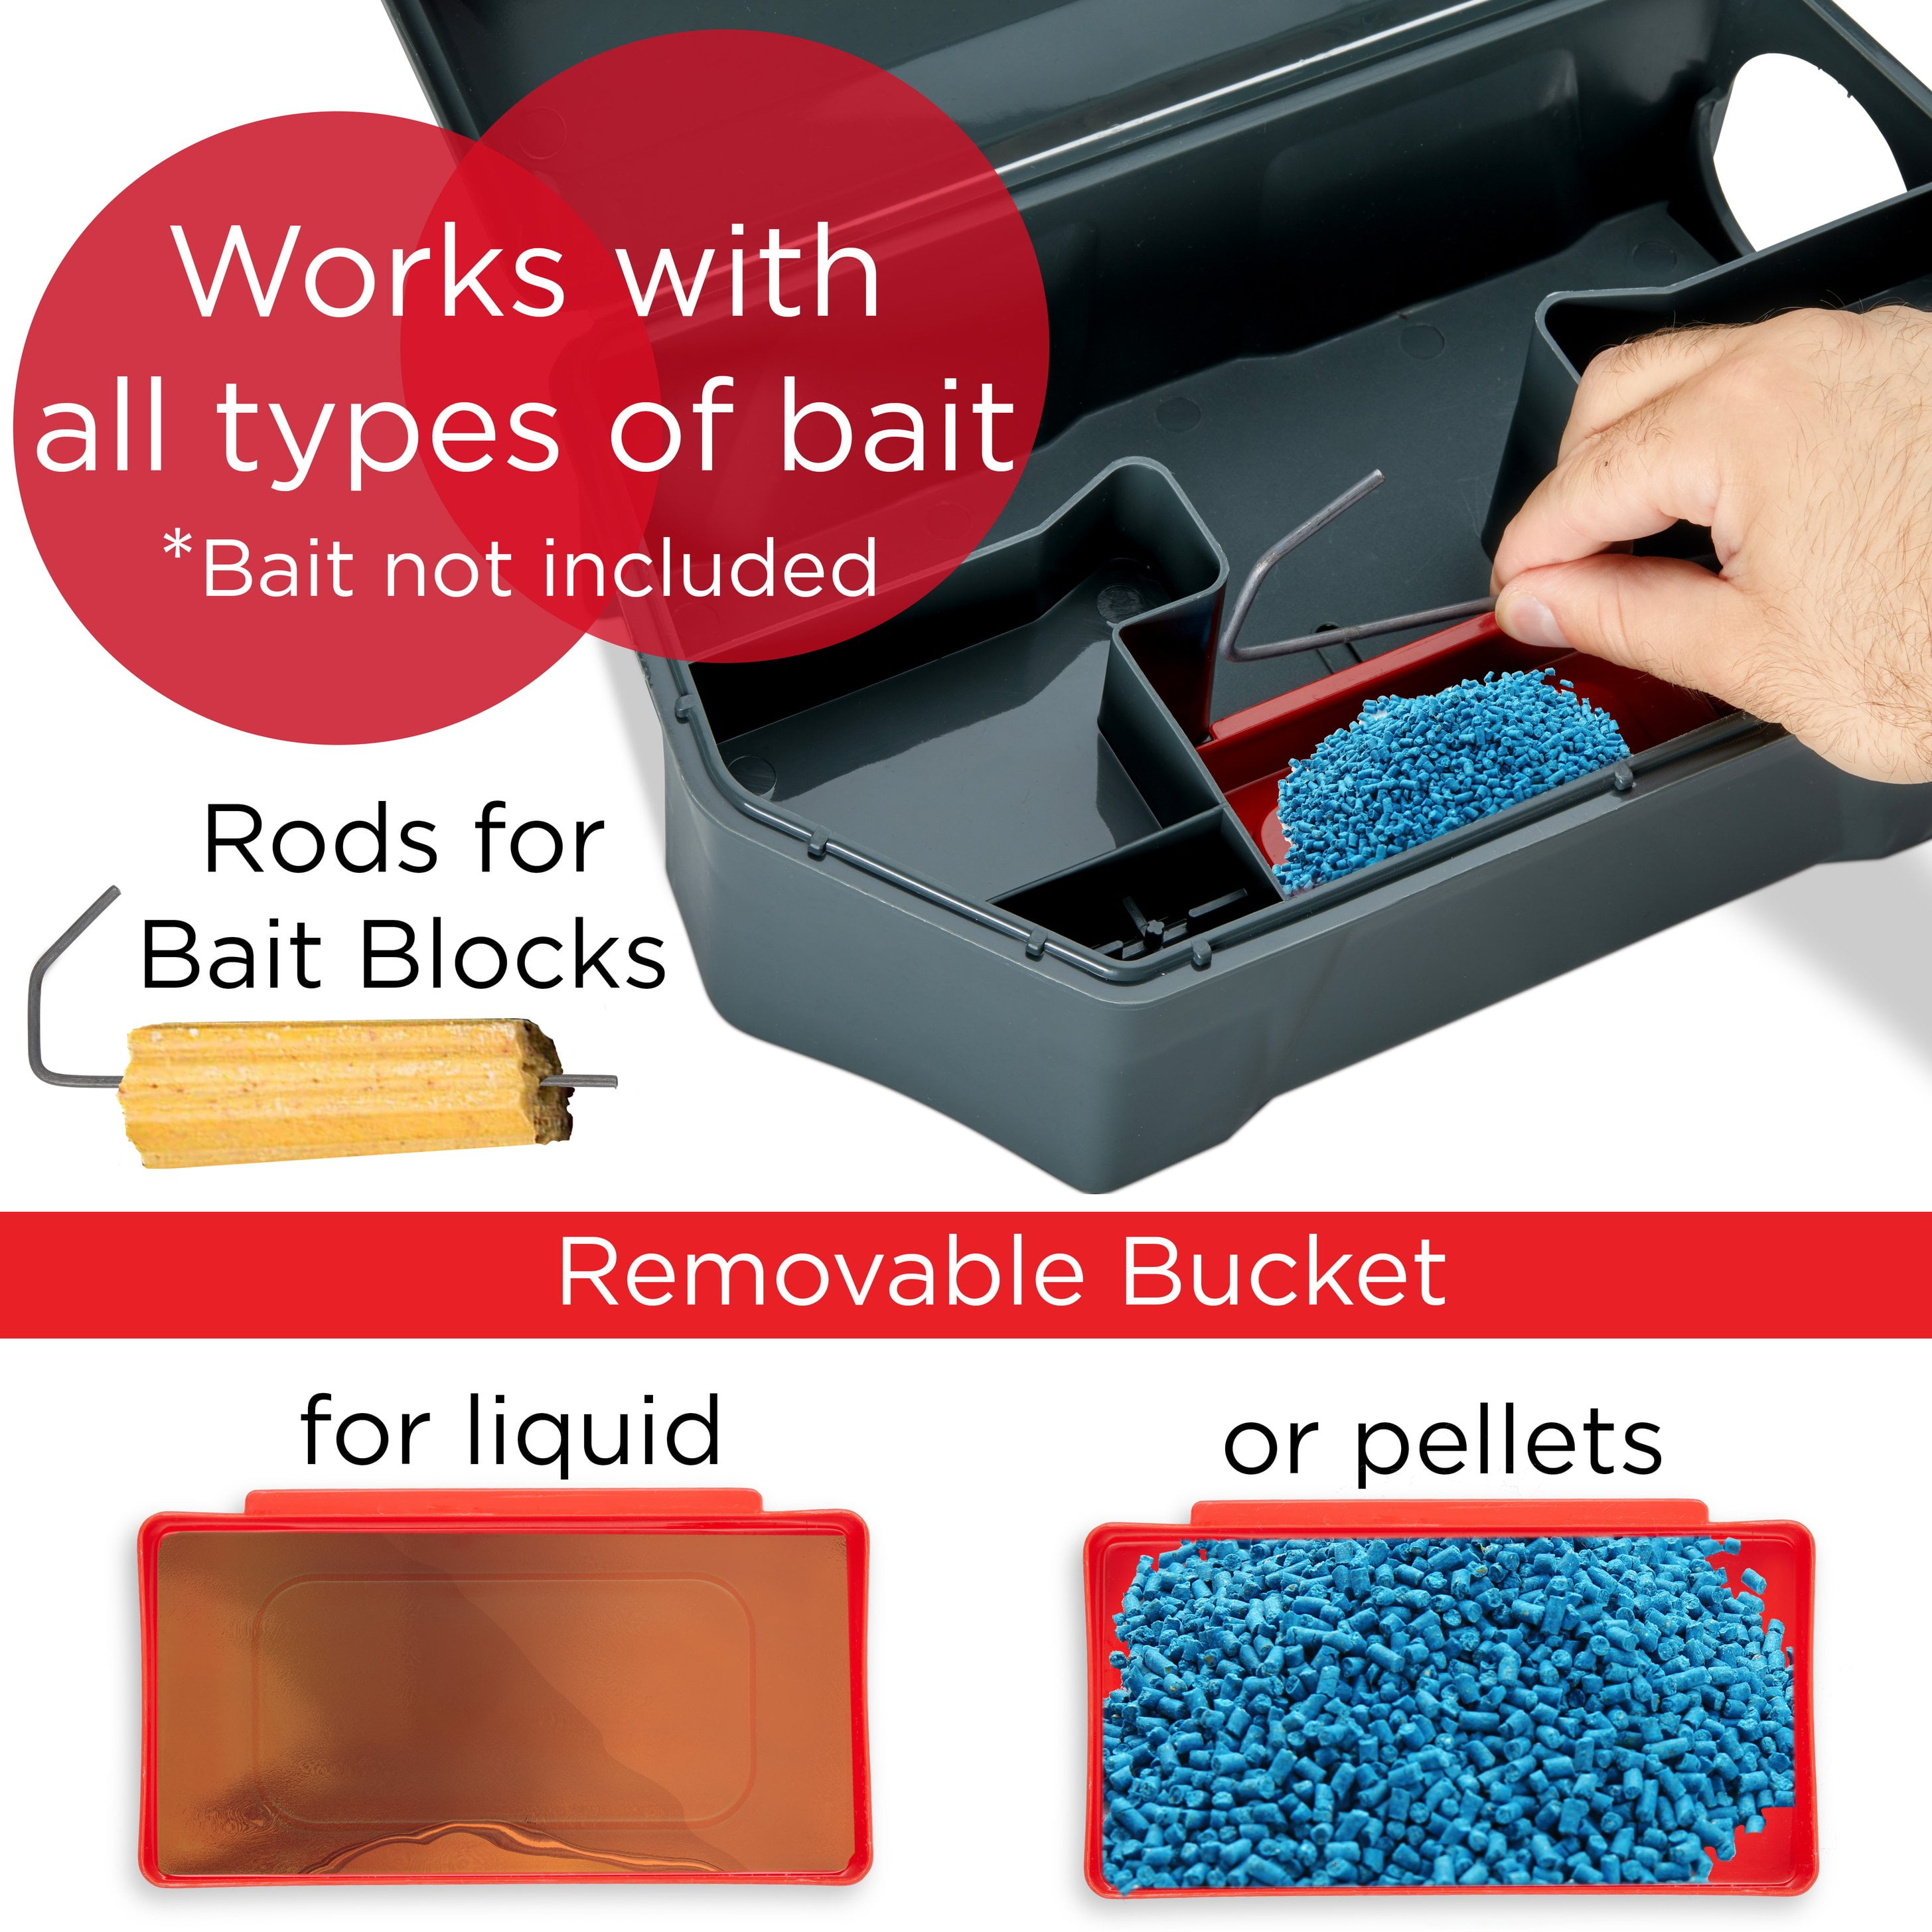 Rat Mouse Rodent Bait Stations  NEW SALE 1 Pack Details about   FPS Rodent Bait Station